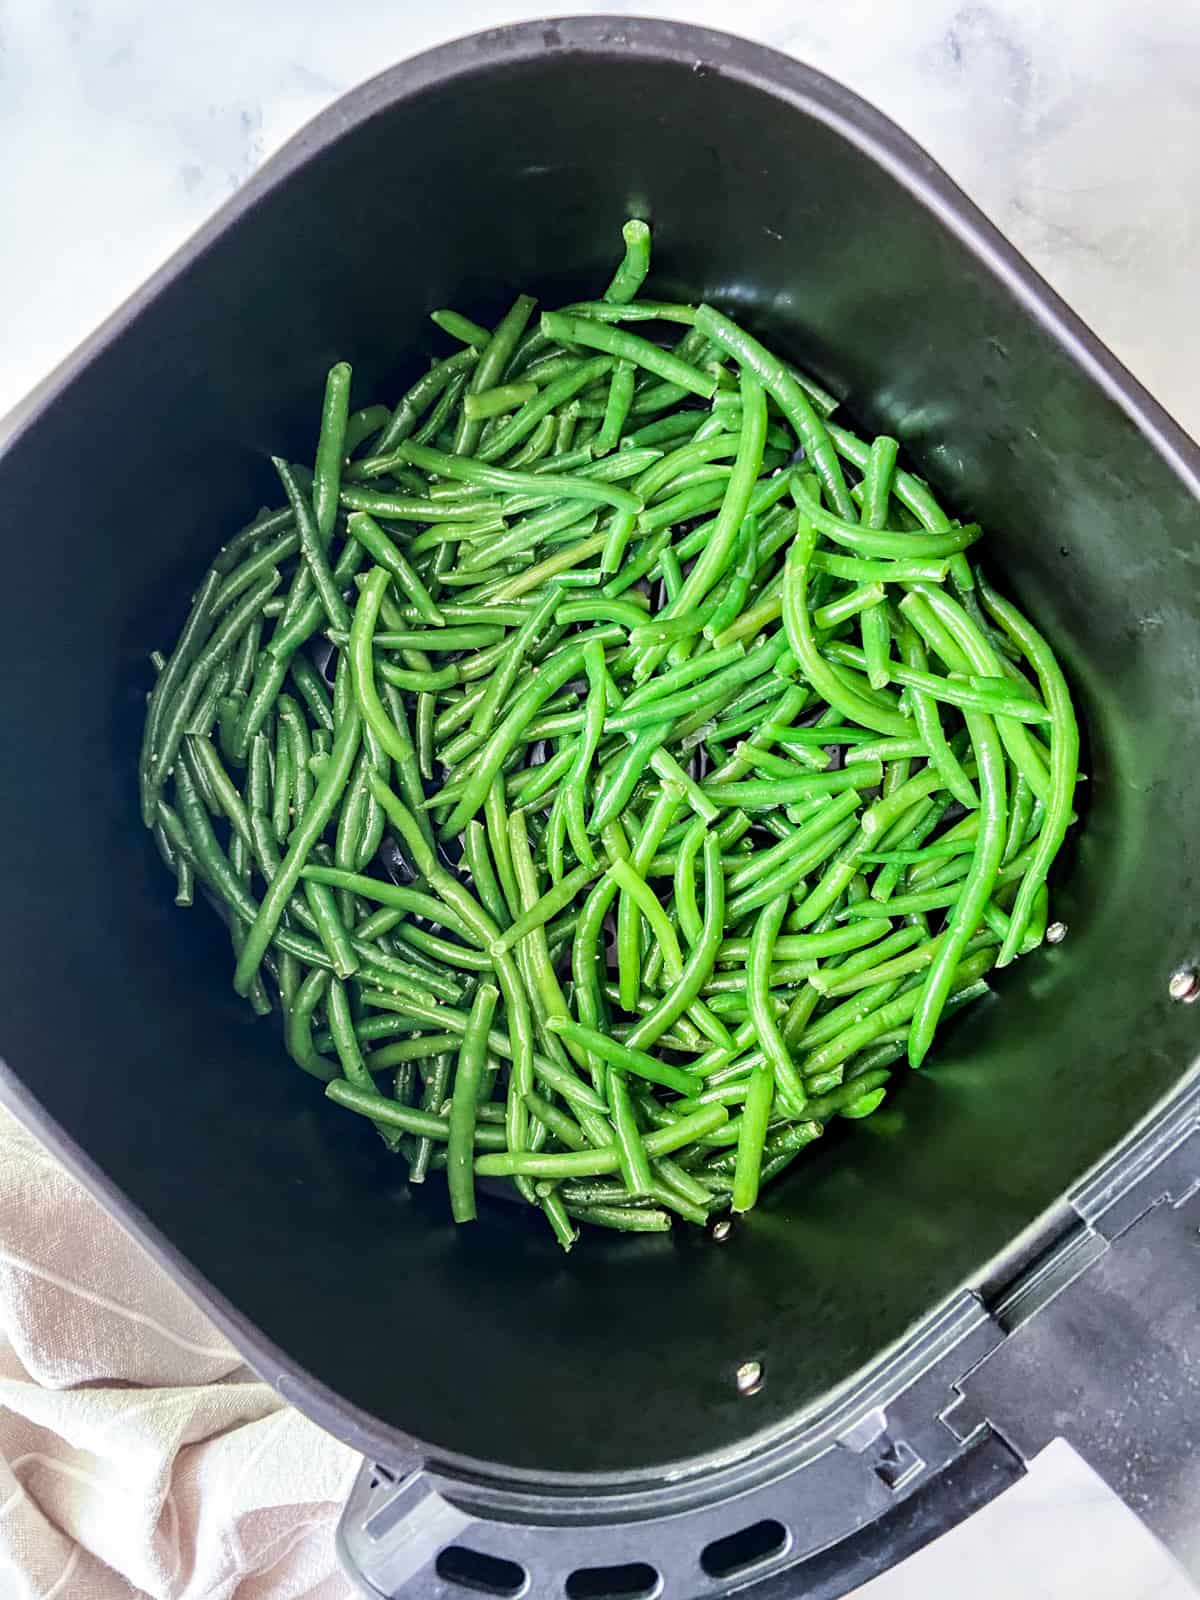 Uncooked green beans in an air fryer basket.